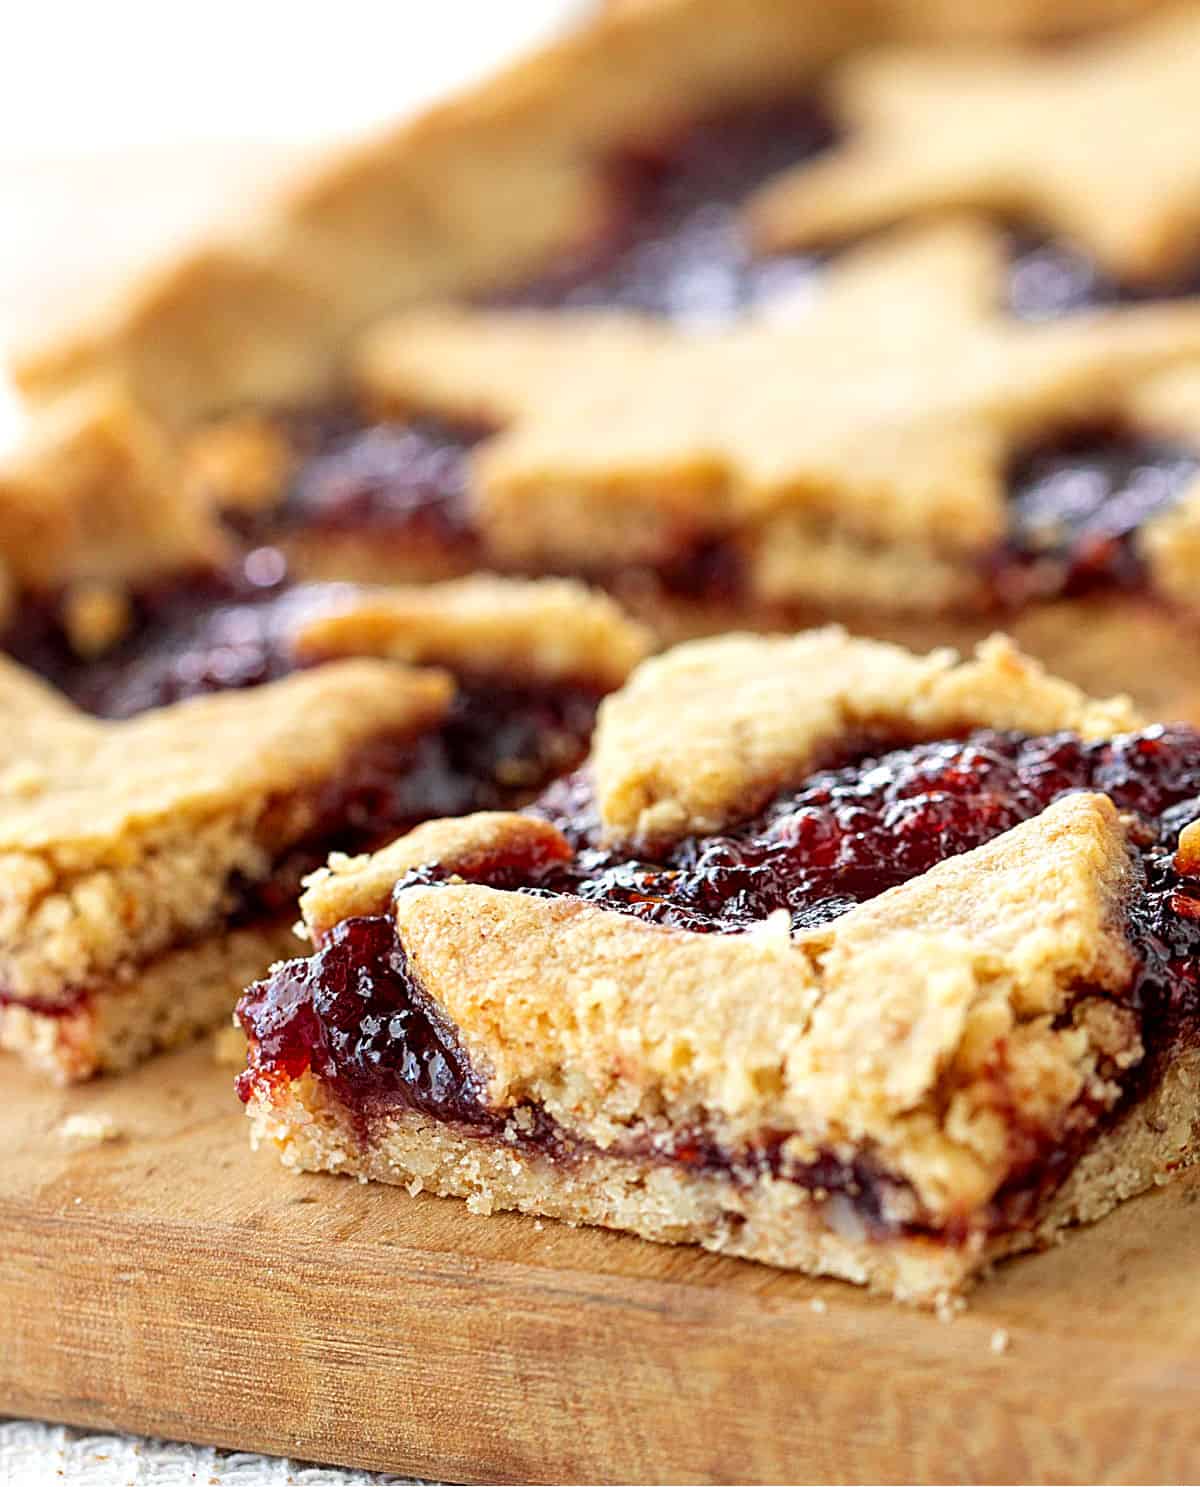 Squares of raspberry linzer torte on light colored wooden board.